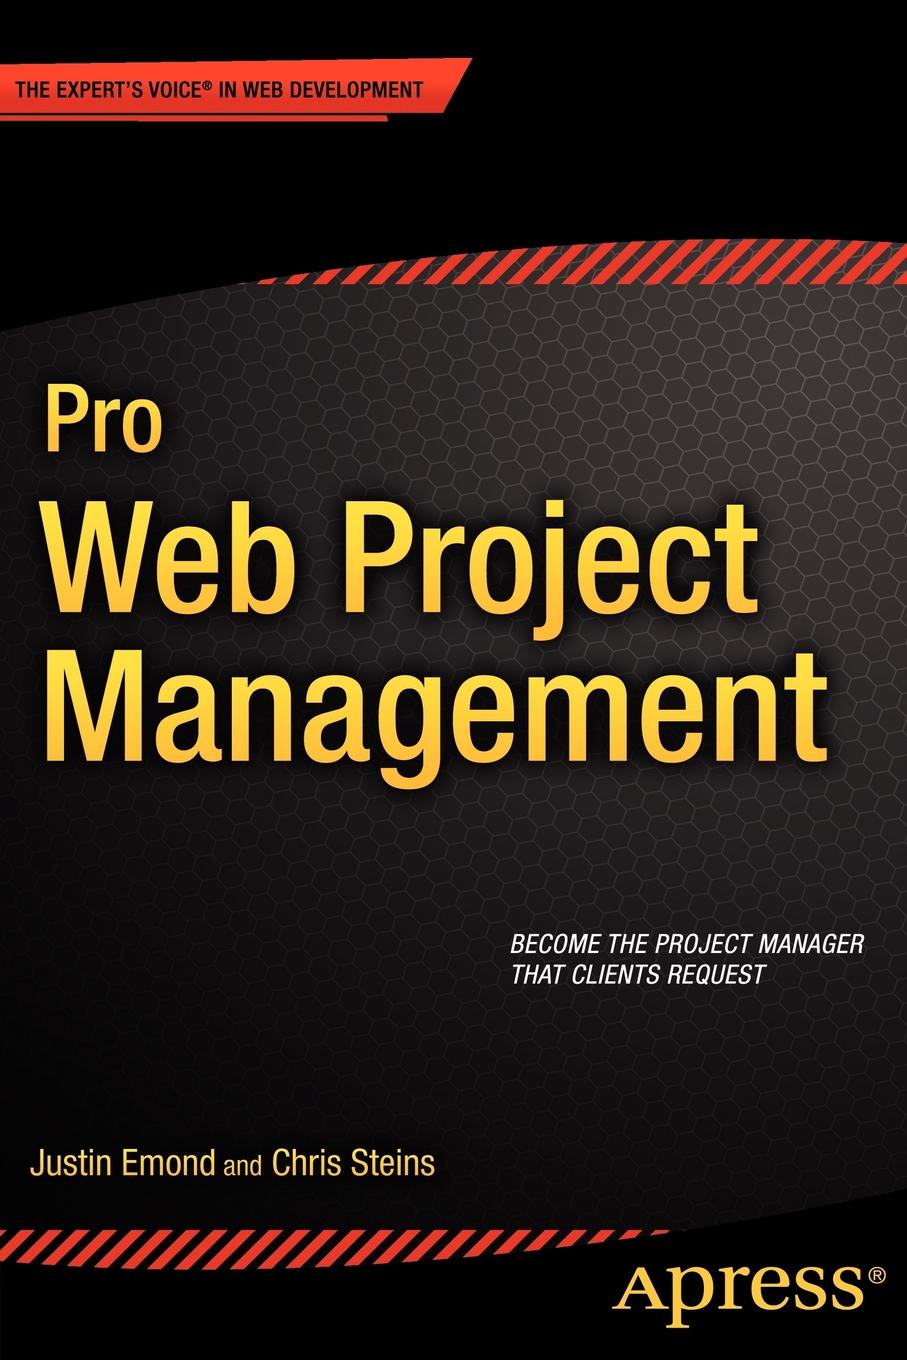 Pro Web Project Management. Maximize Icloud, Newsstand, Reminders, Facetime, and Imessage